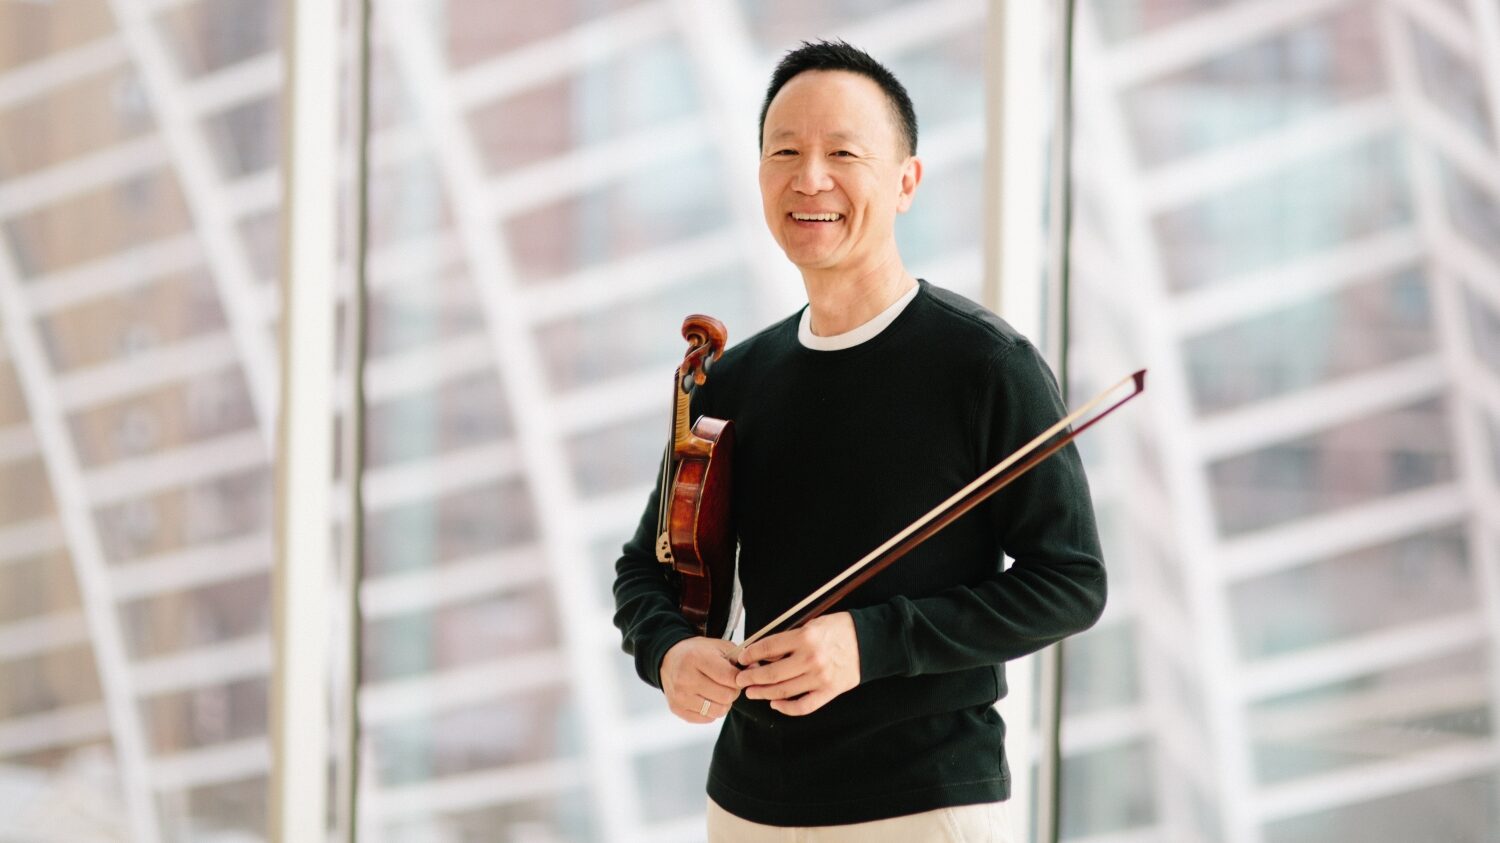 A man in a black sweater holds a violin and smiles